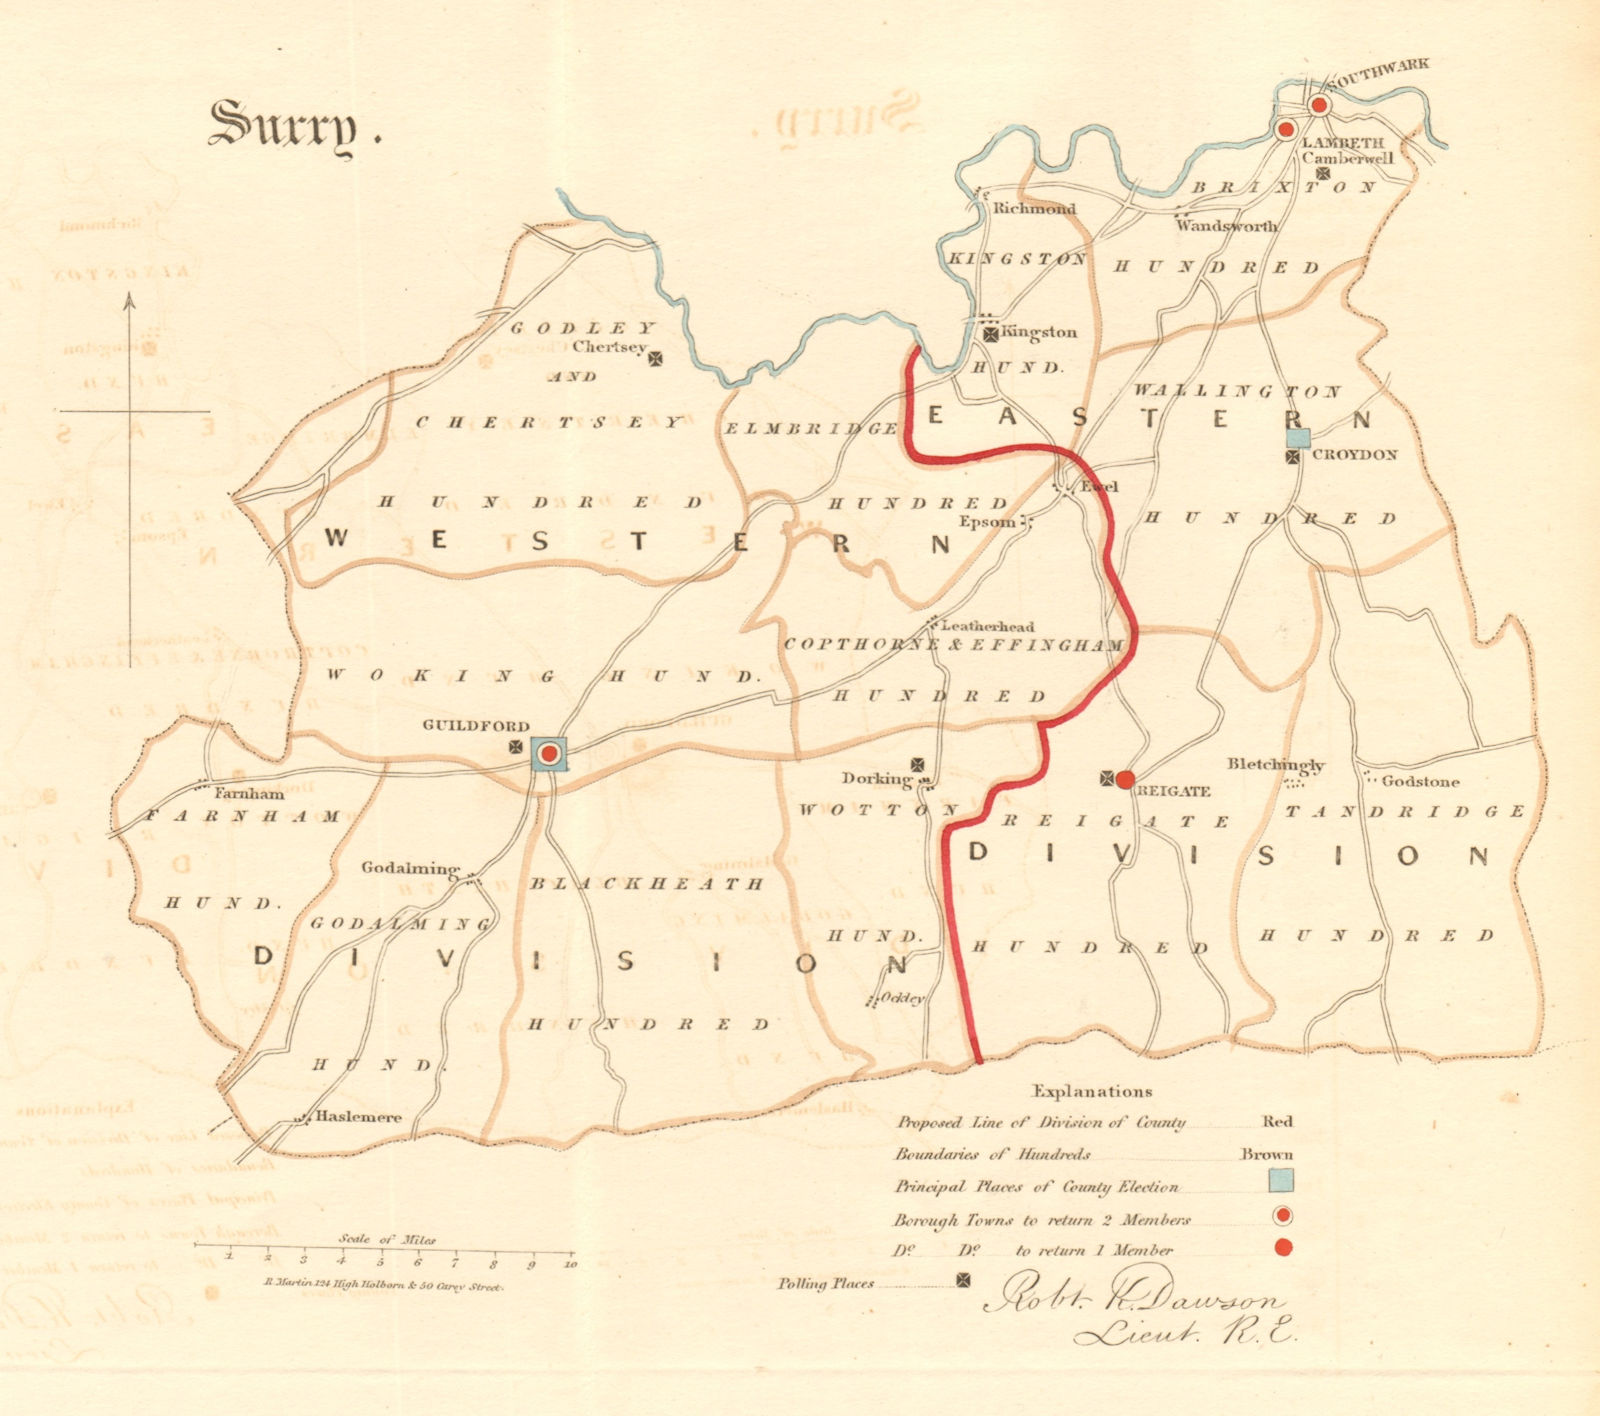 Associate Product Surrey county map. Divisions boroughs electoral. REFORM ACT. DAWSON 1832